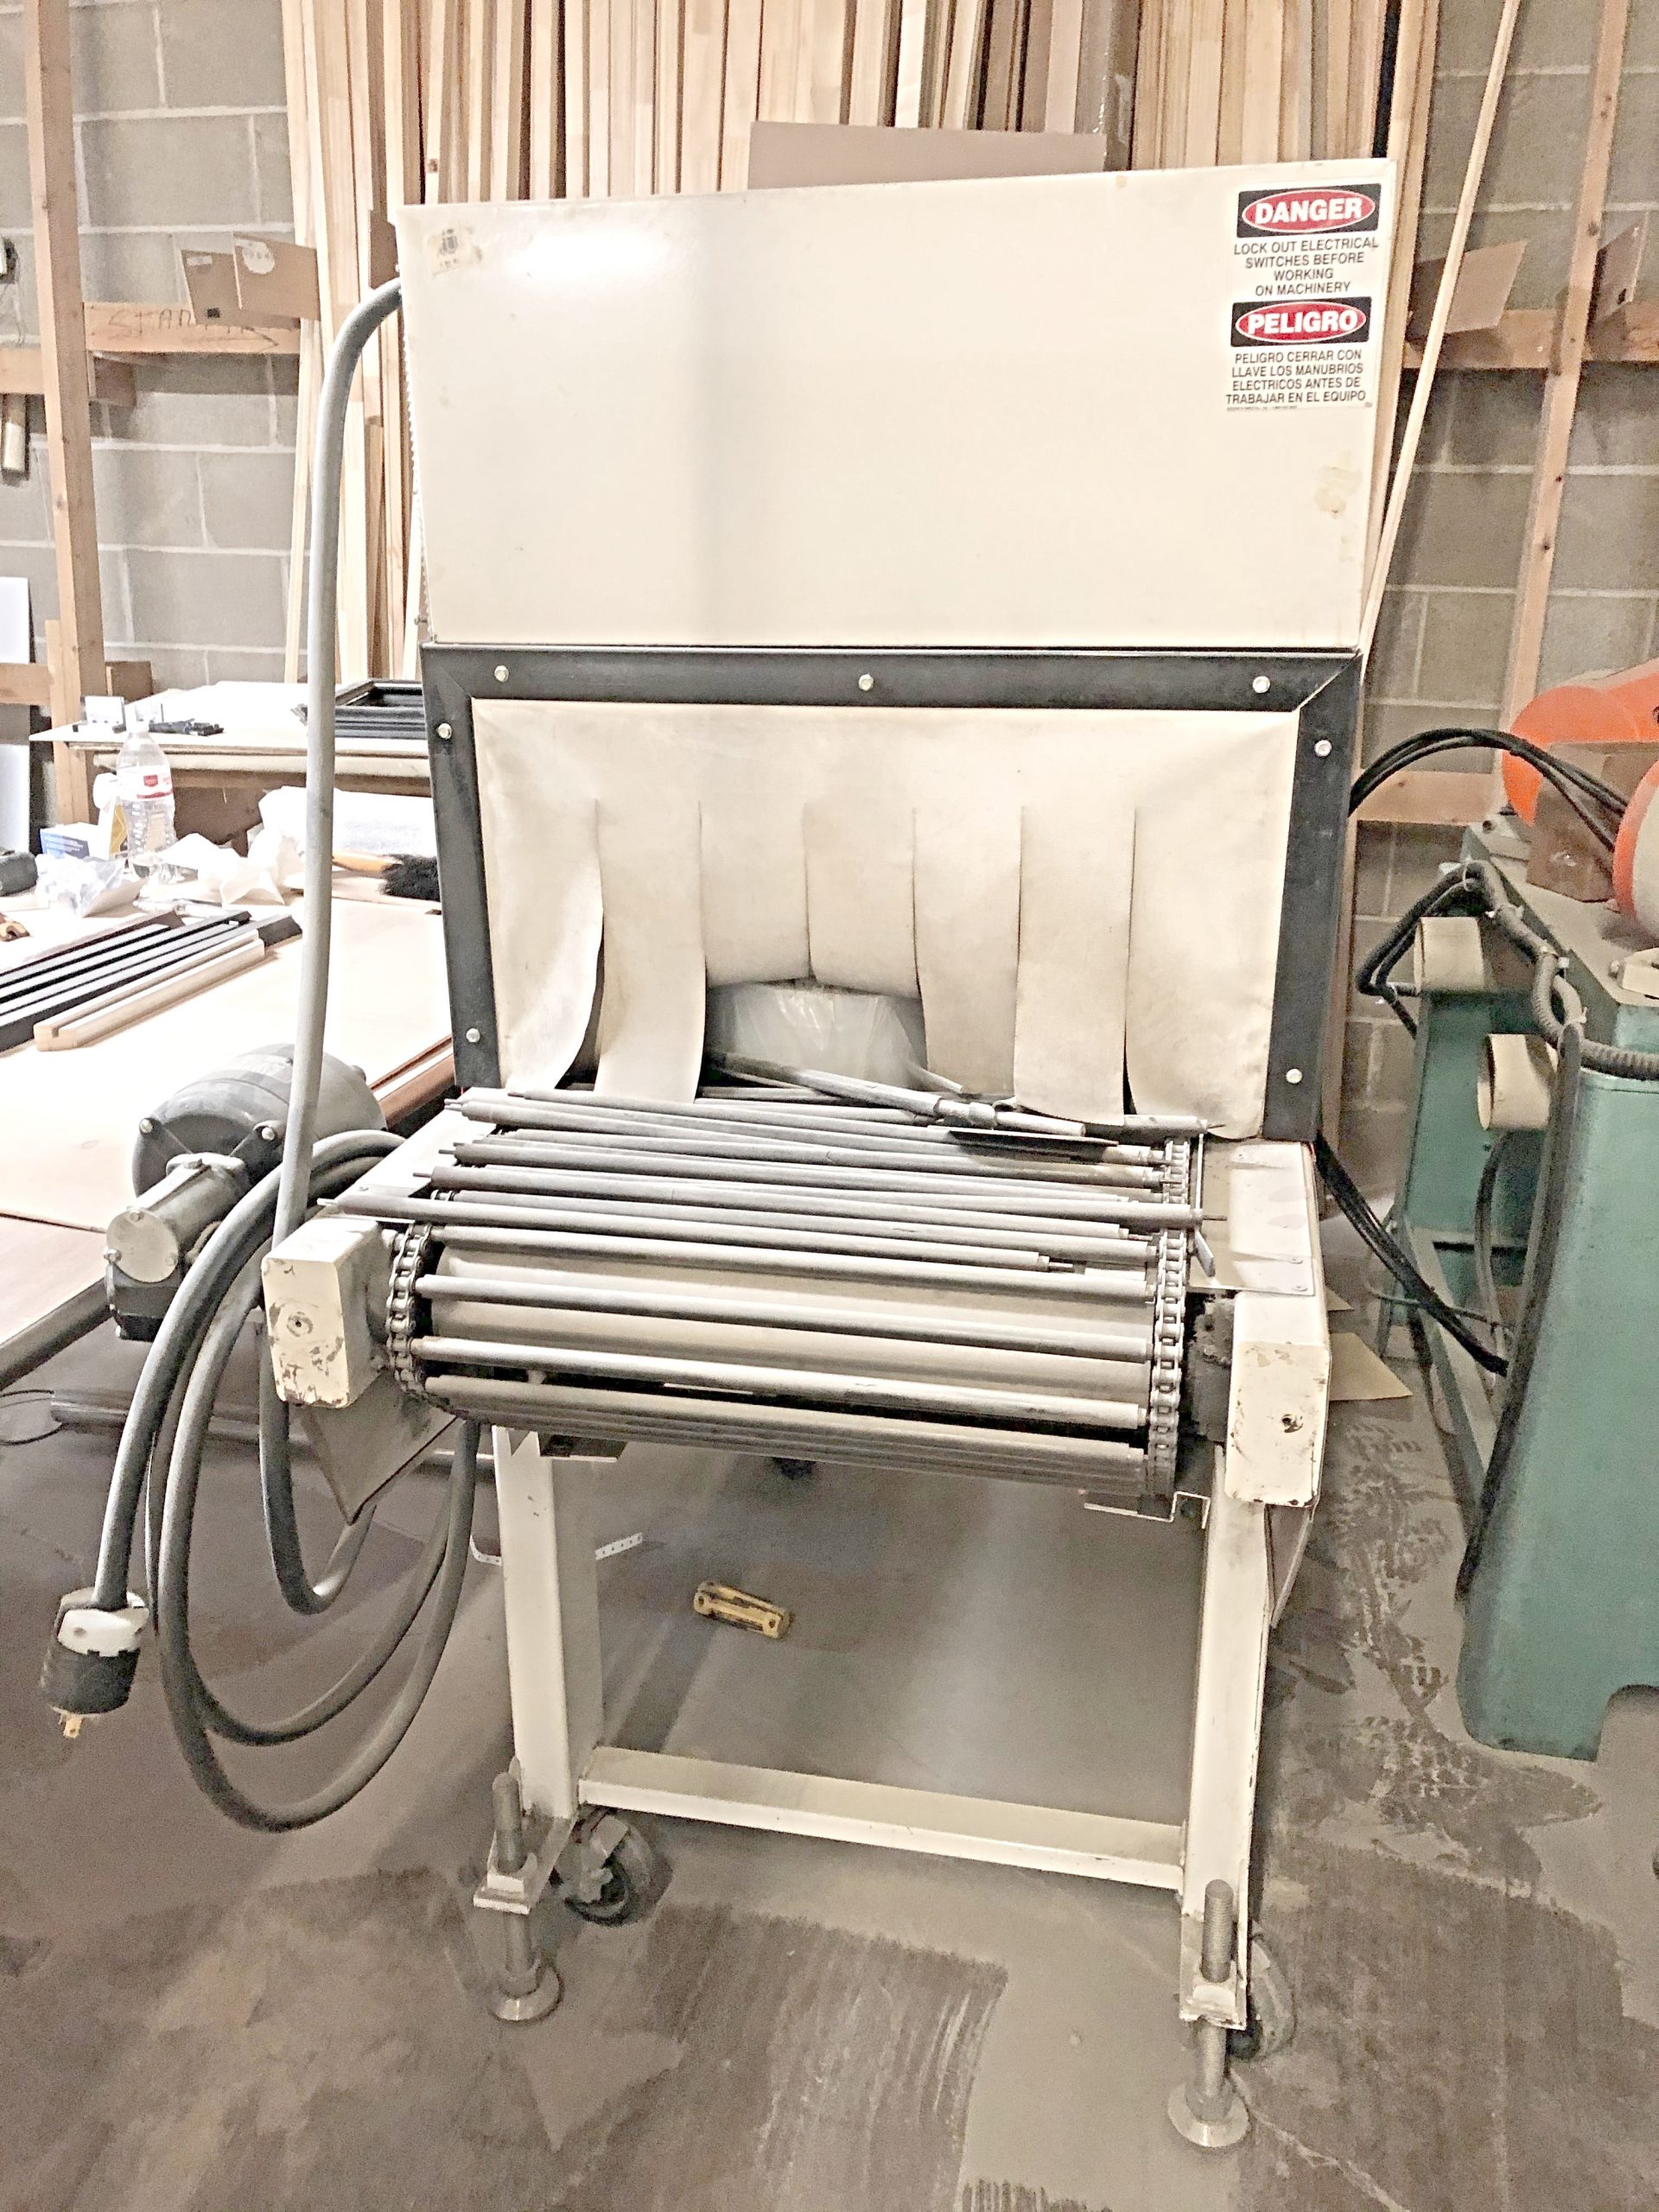 Equipment Lot: Pistorius MN-200 Double Miter Saw, ITW AMP VN4+E3 Frame Joiner, Belco ILS 3022 L- Sealer, & Belco Shrink Tunnel (Used) Item # AGFS-94 (Illinois)